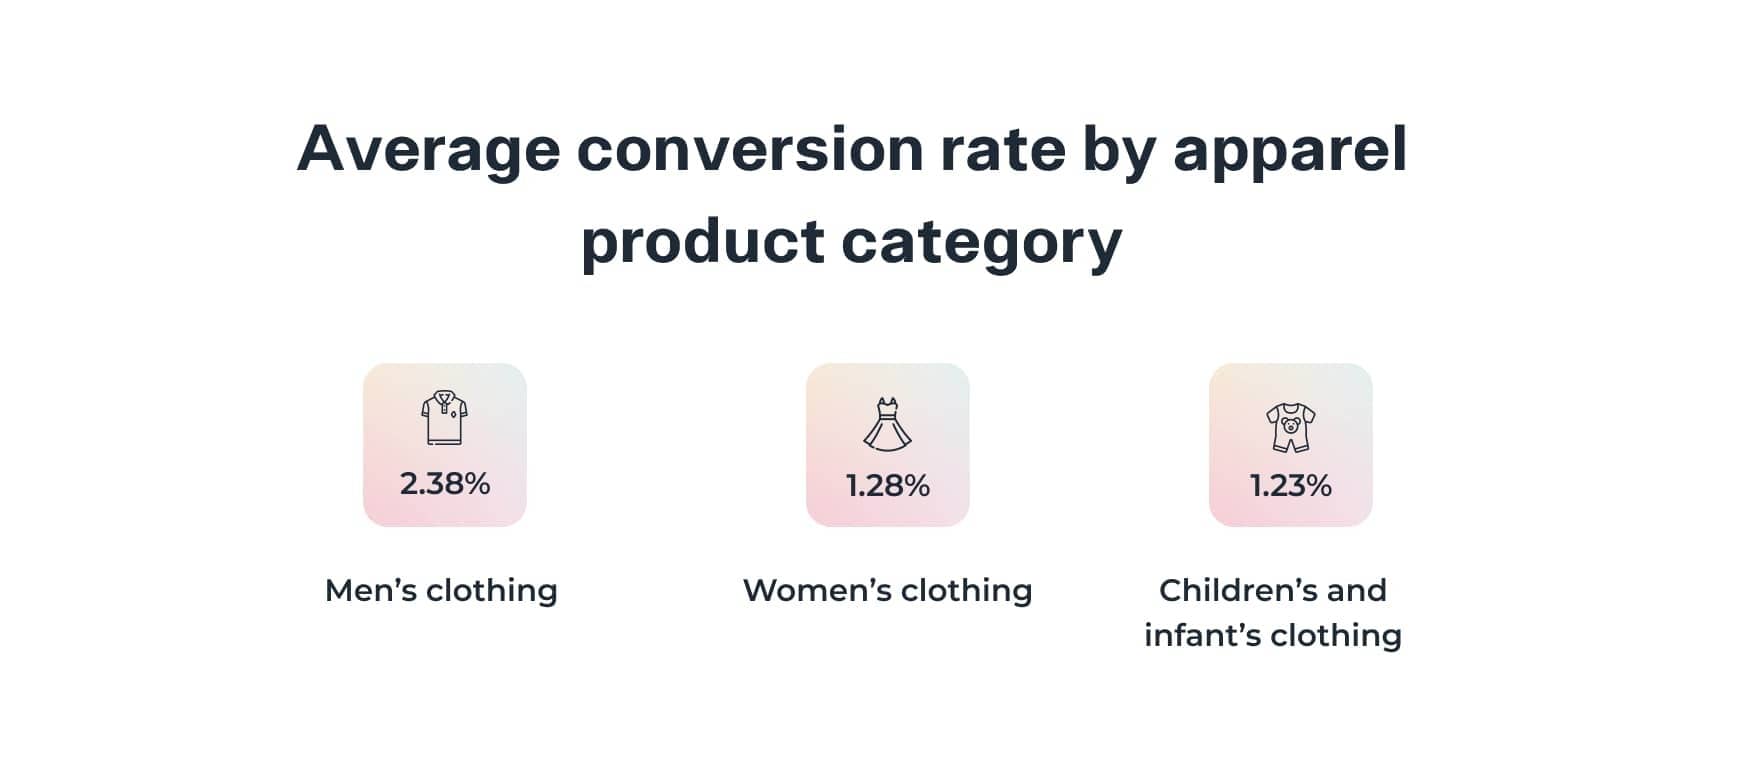 Fashion eCommerce conversion rates across various apparel product categories.